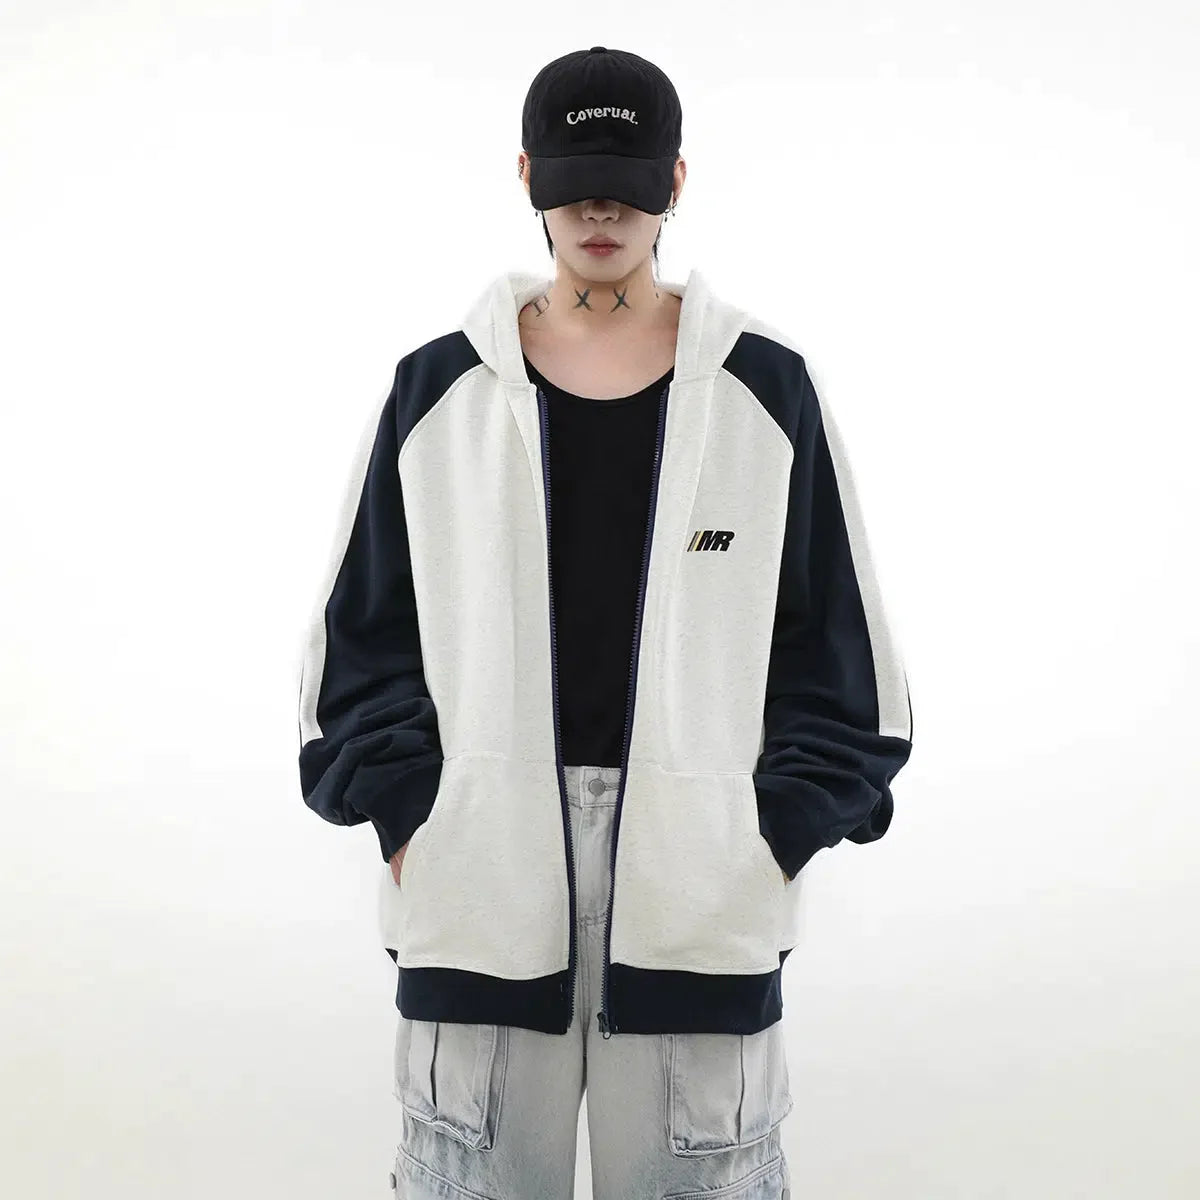 Contrast Comfty Fit Casual Hoodie Korean Street Fashion Hoodie By Mr Nearly Shop Online at OH Vault